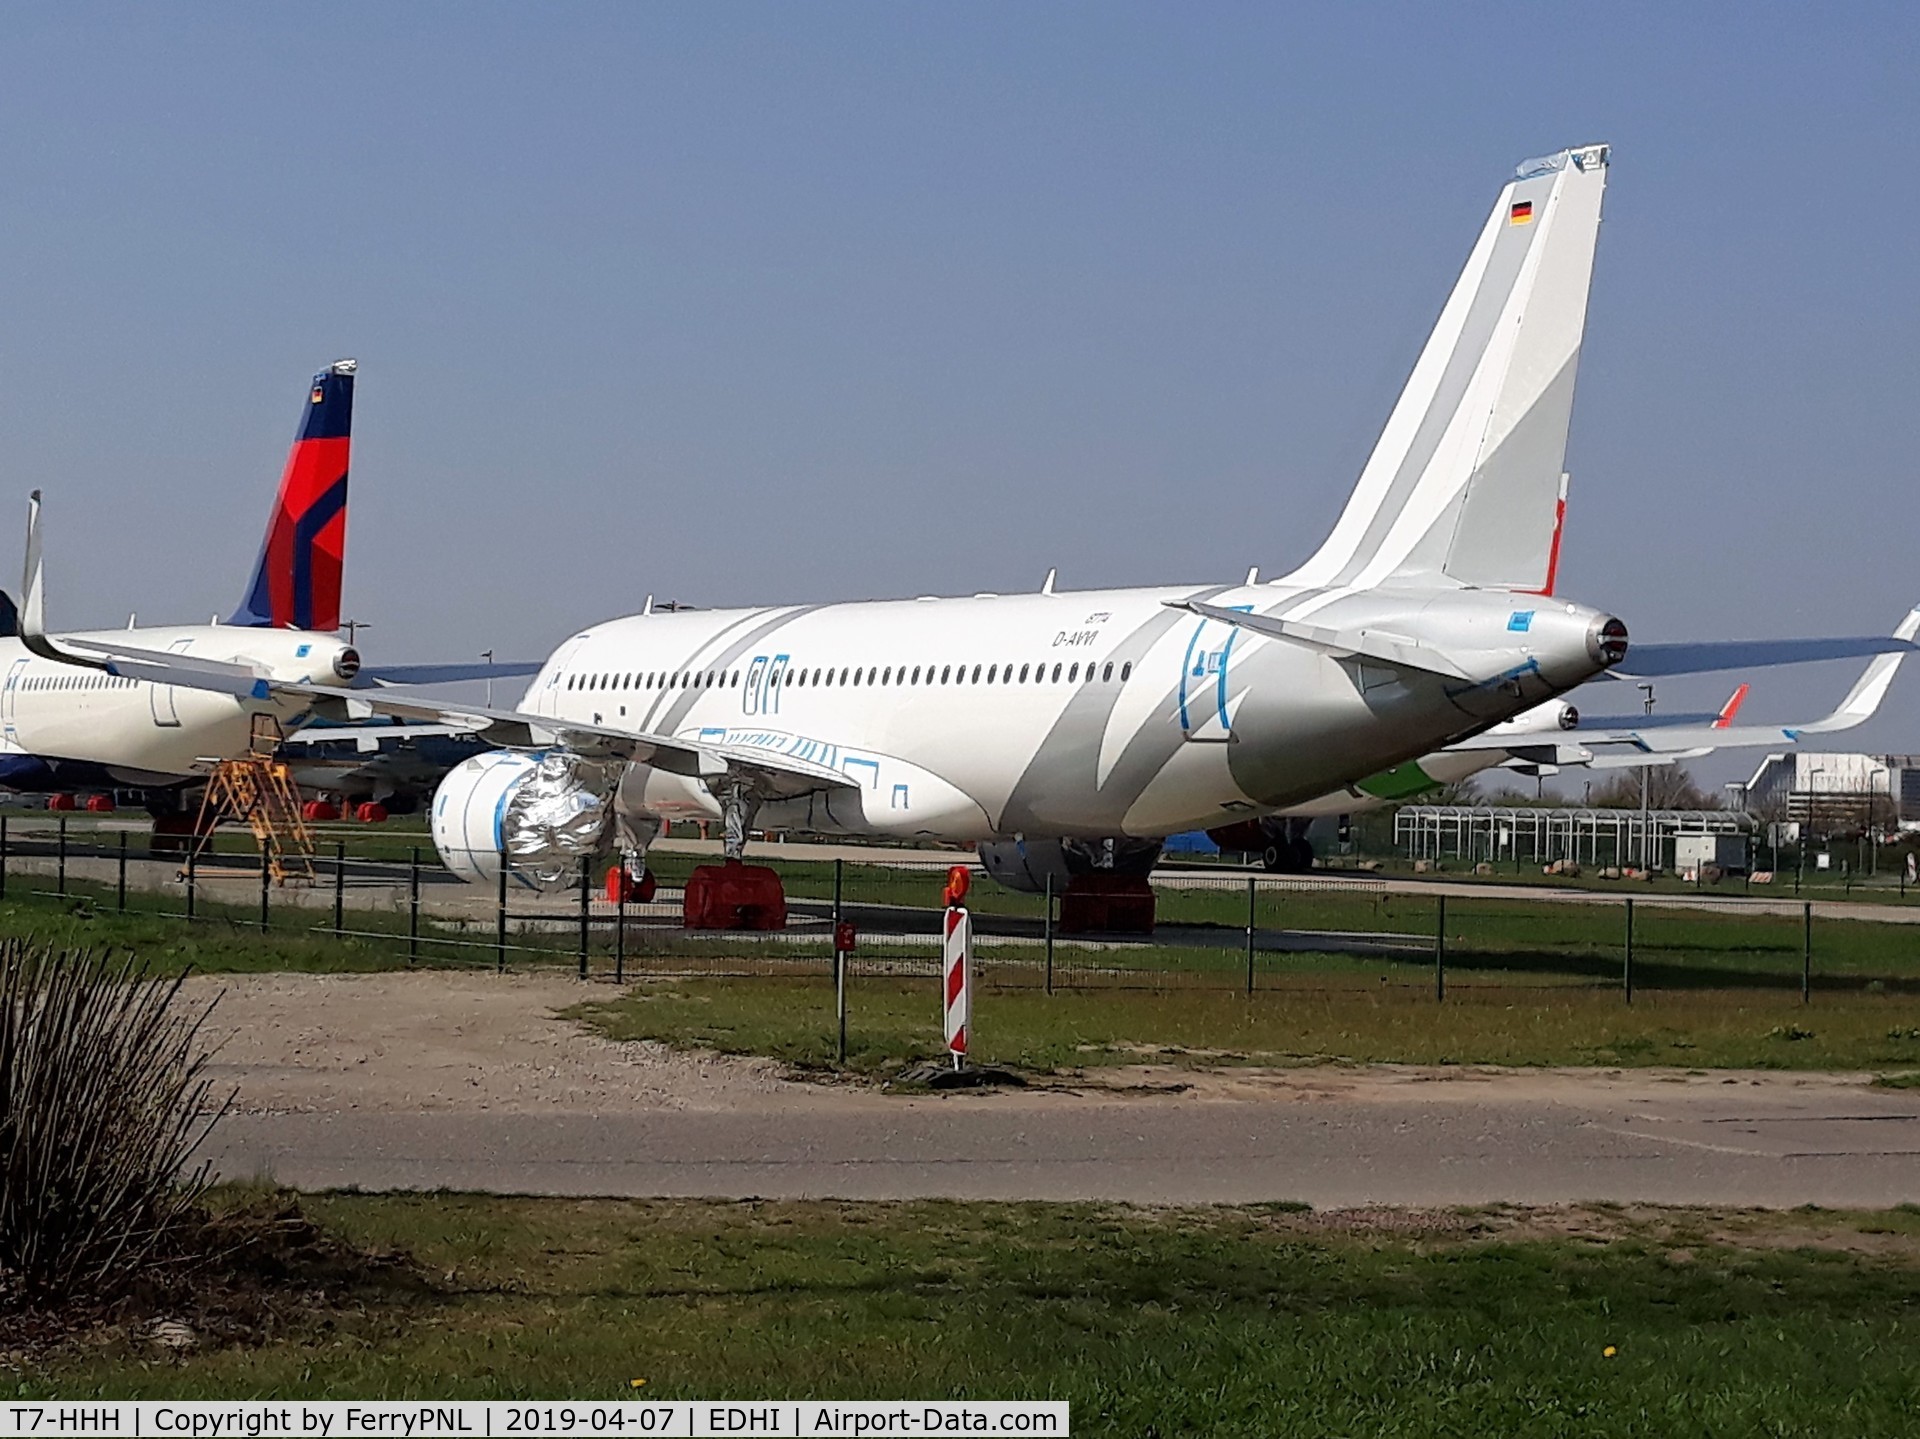 T7-HHH, 2018 Airbus A320-251N C/N 8774, A320CJ Neo waiting for completion and delivery